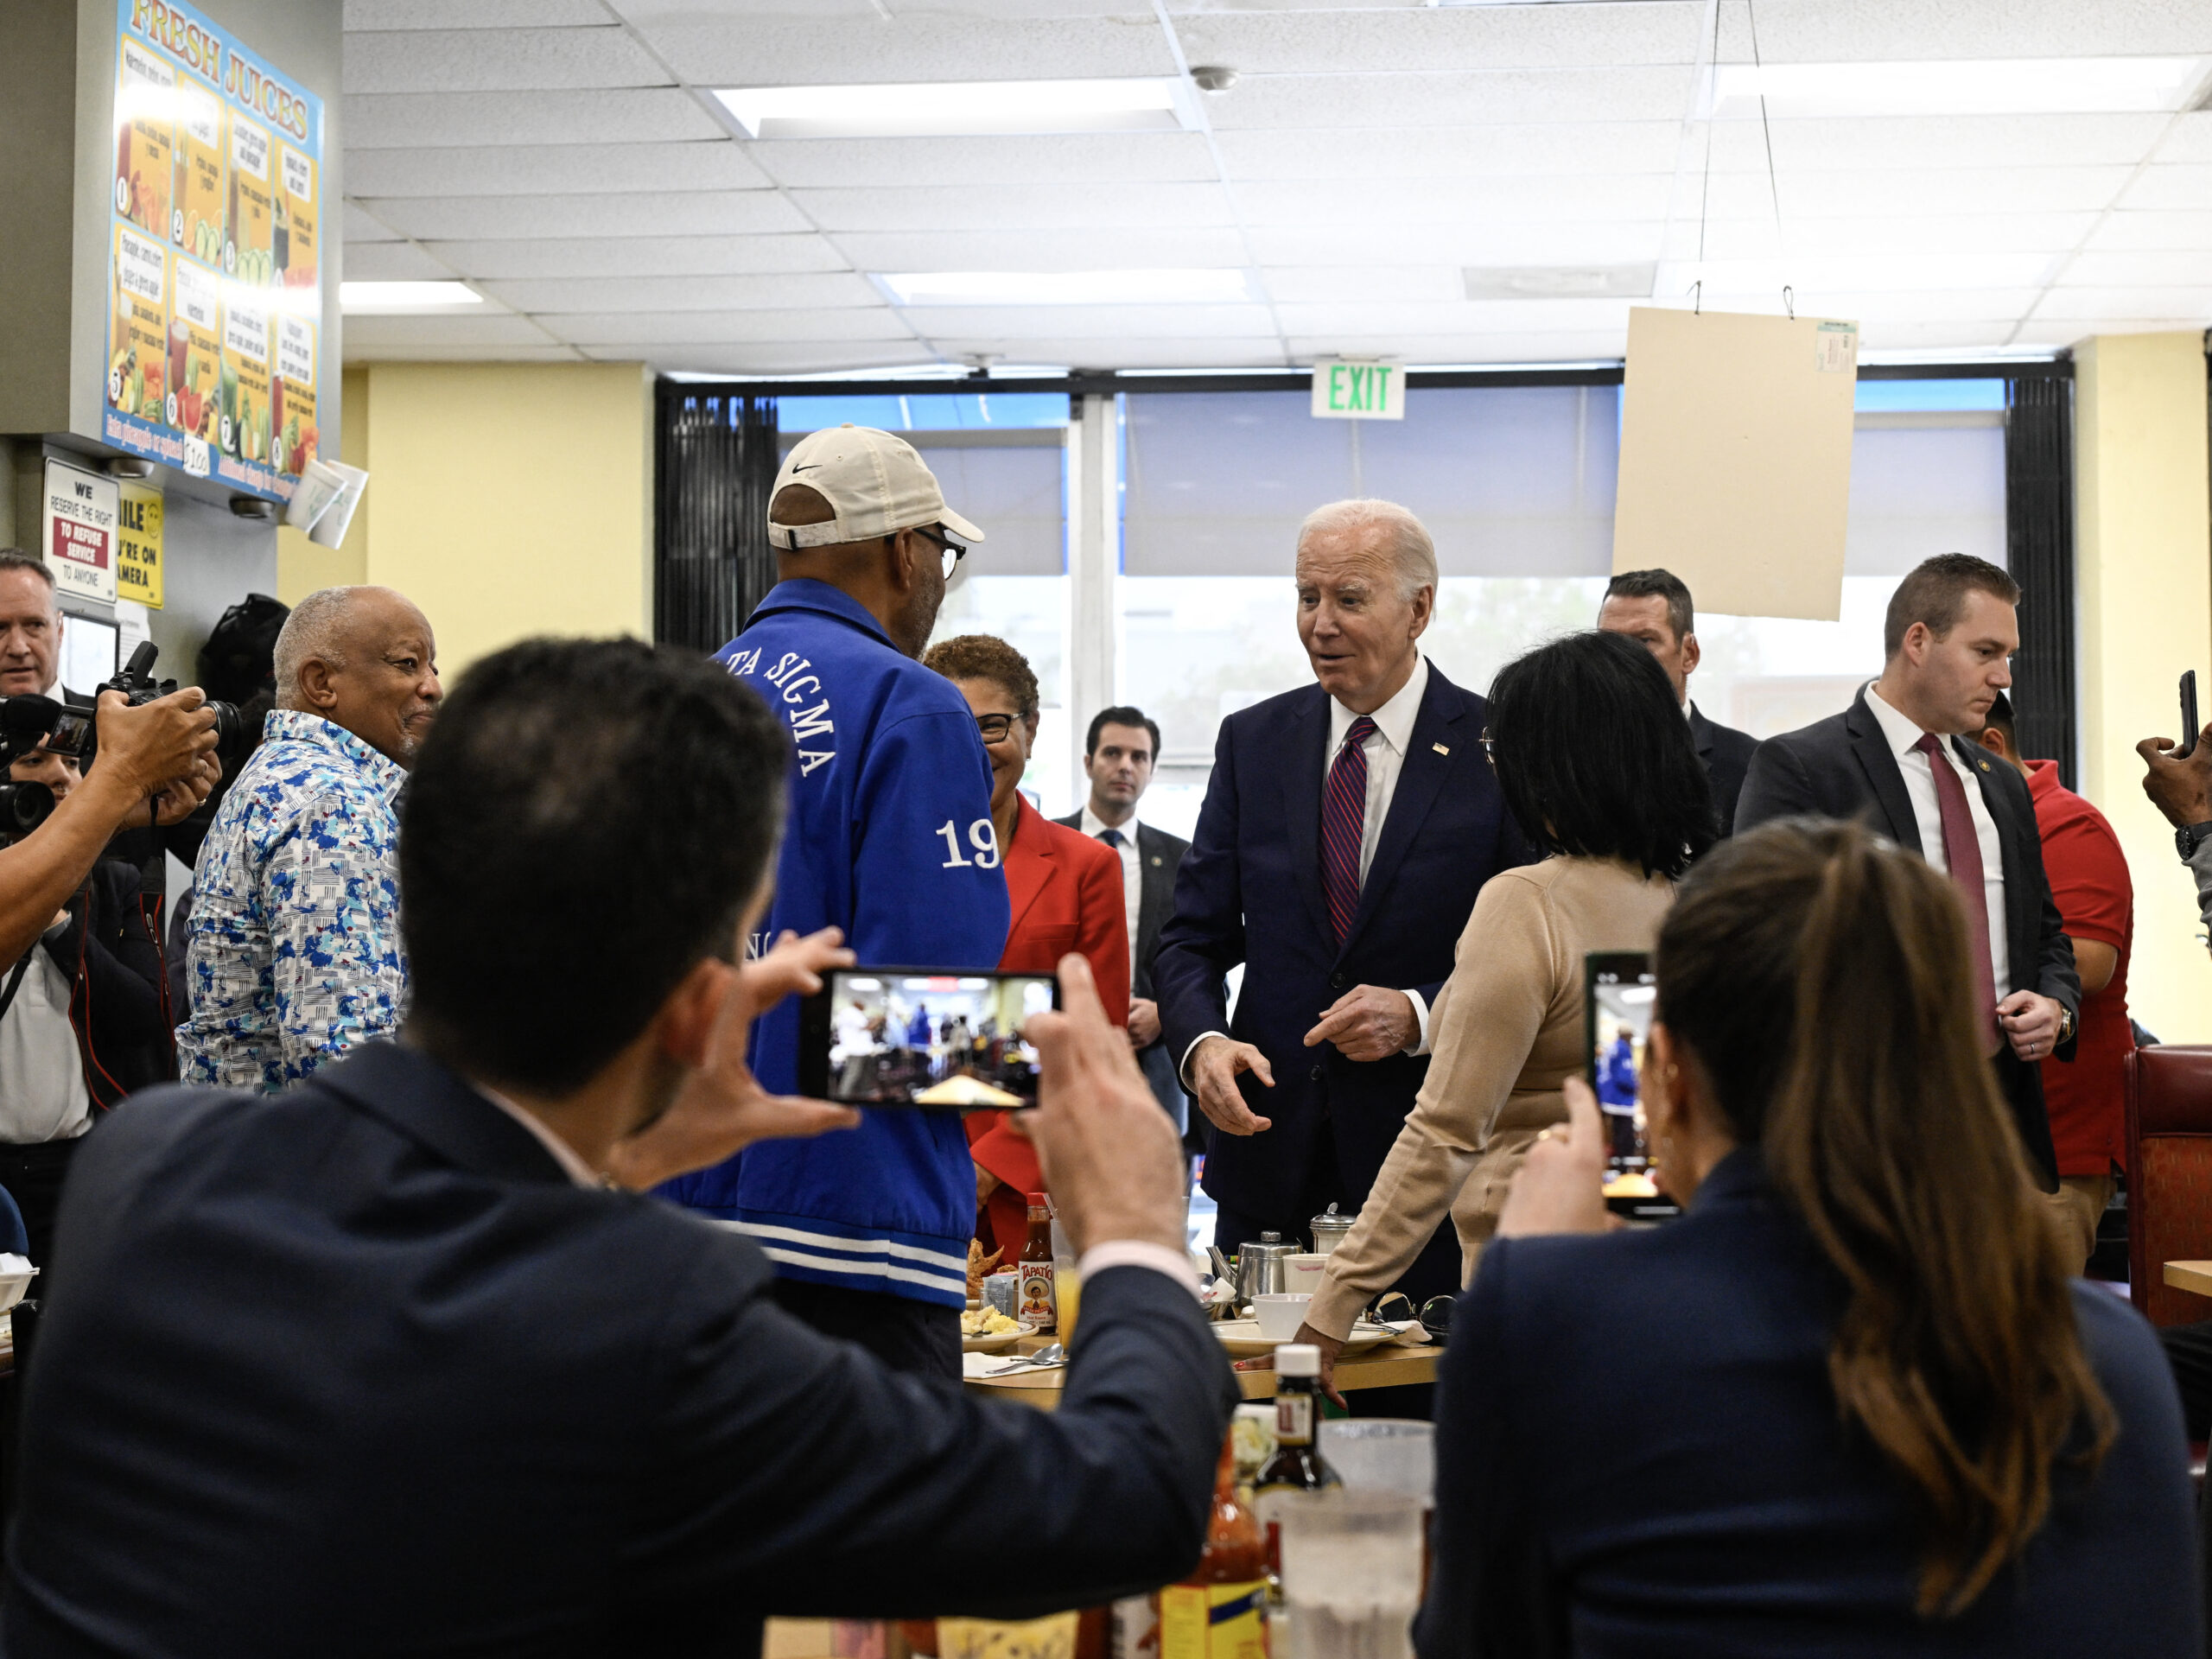 What Biden’s been eating on the trail and what it says about his campaign